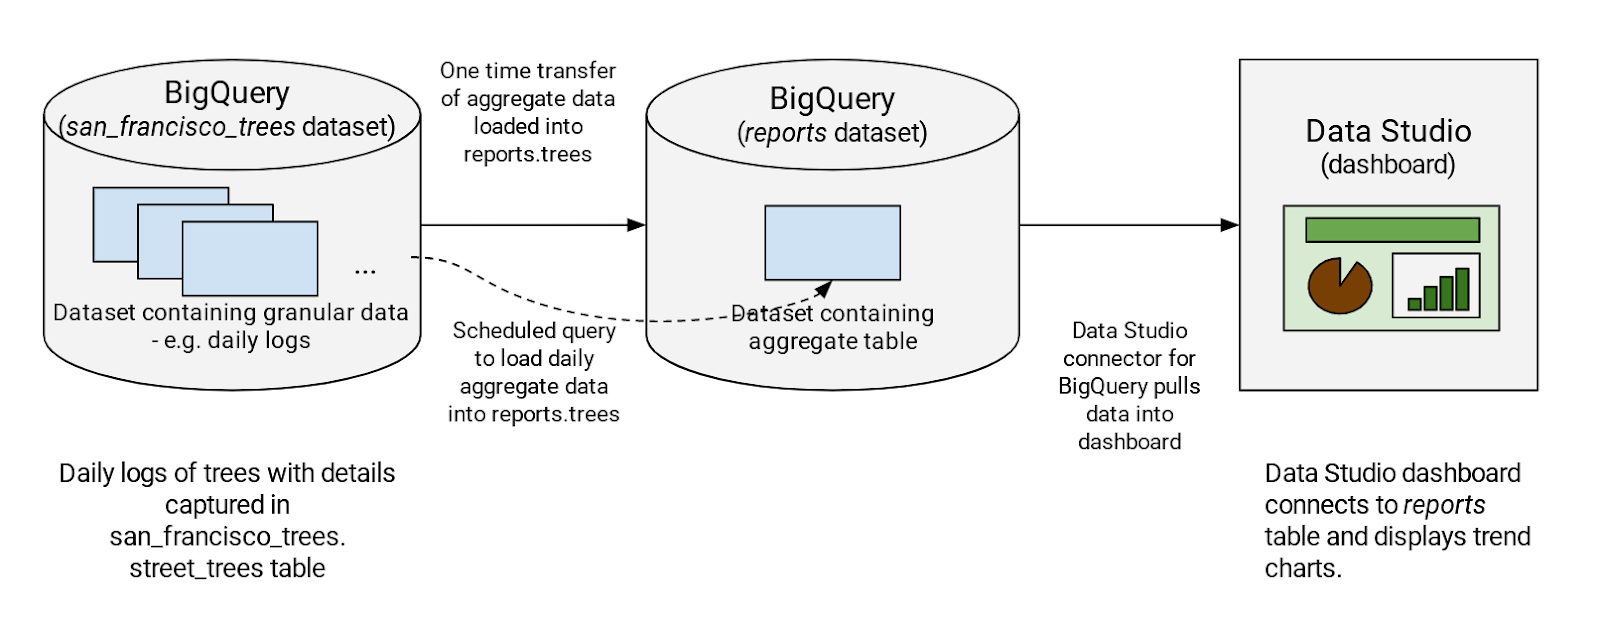 The data flow from a dataset containing granular data to a dataset containing an aggregate table, then to the Data Studio dashboard